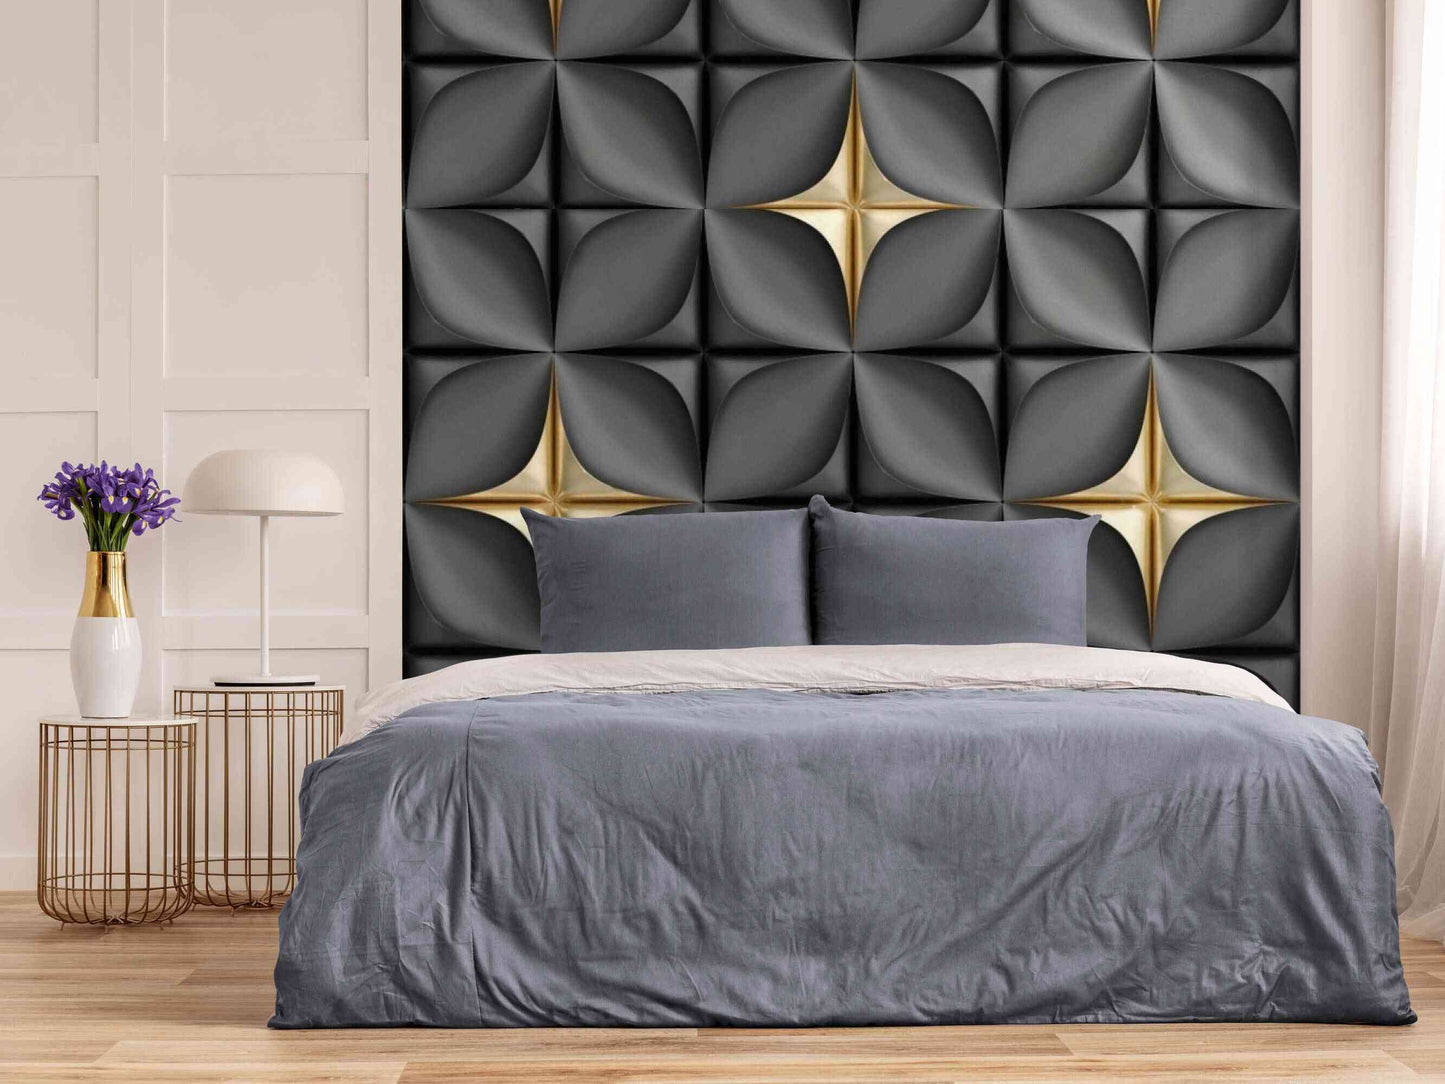 Modern living room with gray and gold abstract wallpaper mural as a focal point